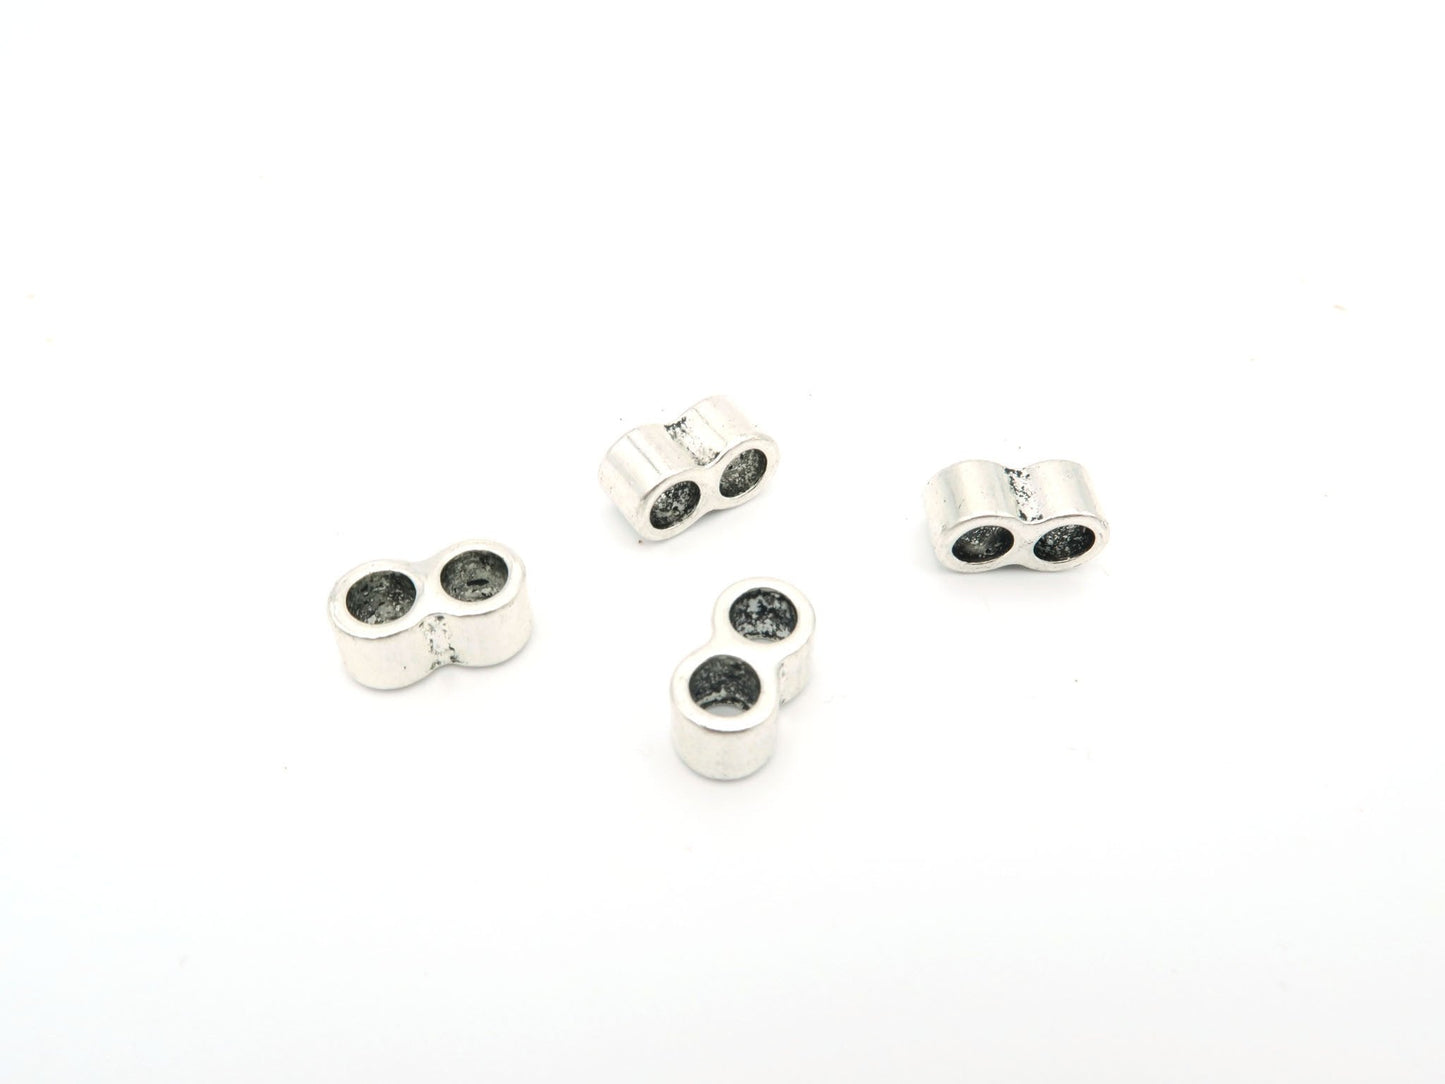 20 Pcs for 5mm round leather Antique Silver 2 Stand bead , jewelry supplies jewelry finding D-5-5-34